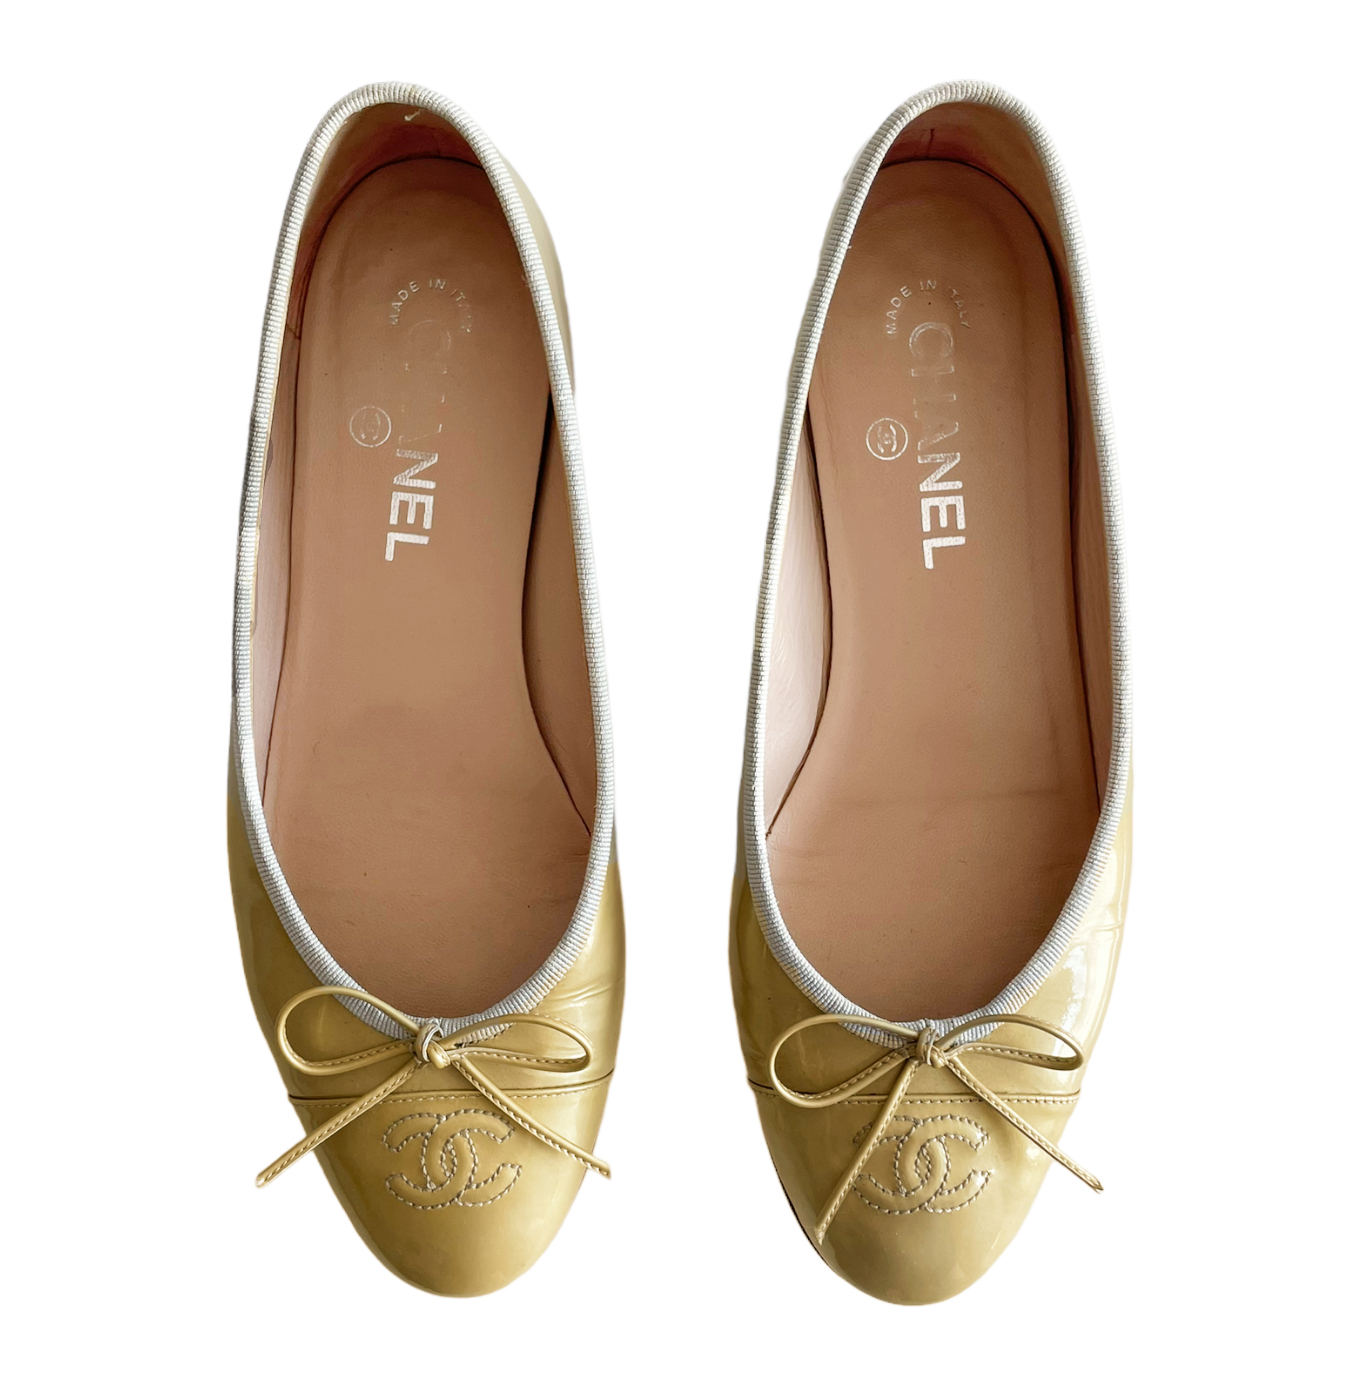 Chanel Bow Patent Leather Ballet Flats in Gold UK 5.5